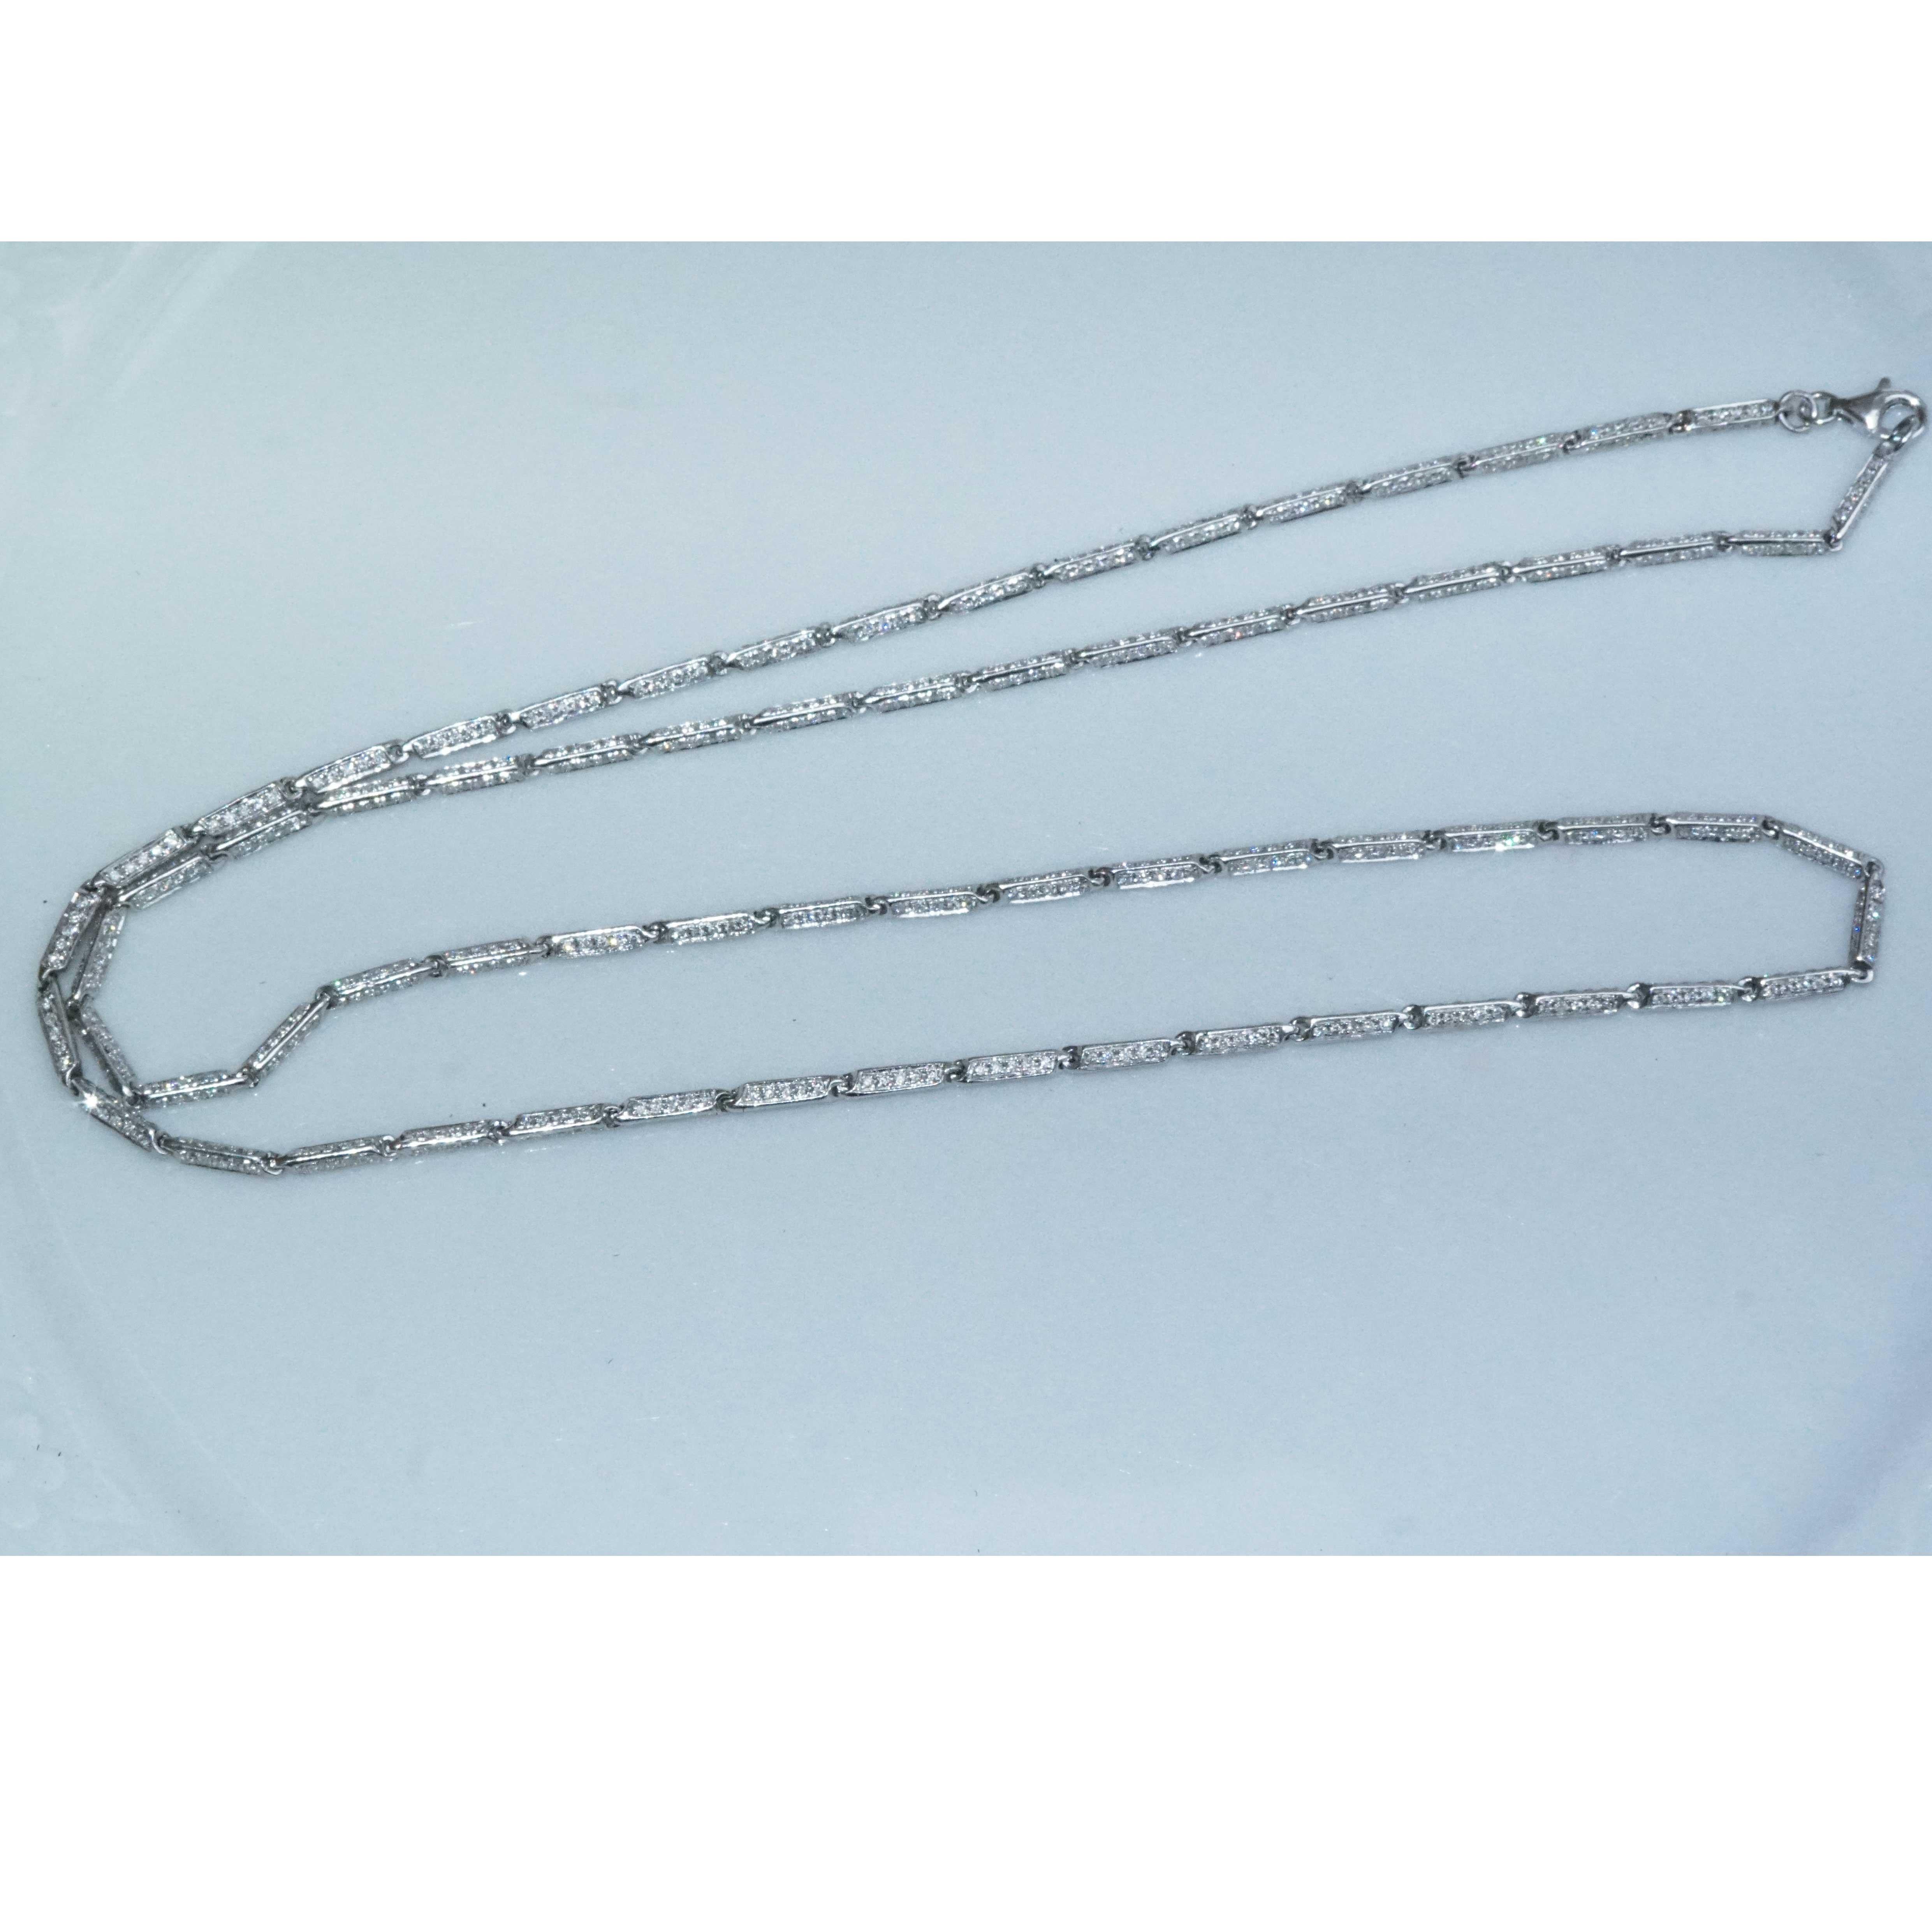 Brilliant Necklace 6.65 carat 1050 Diamonds OPERA Length 27 inch fully movable For Sale 4